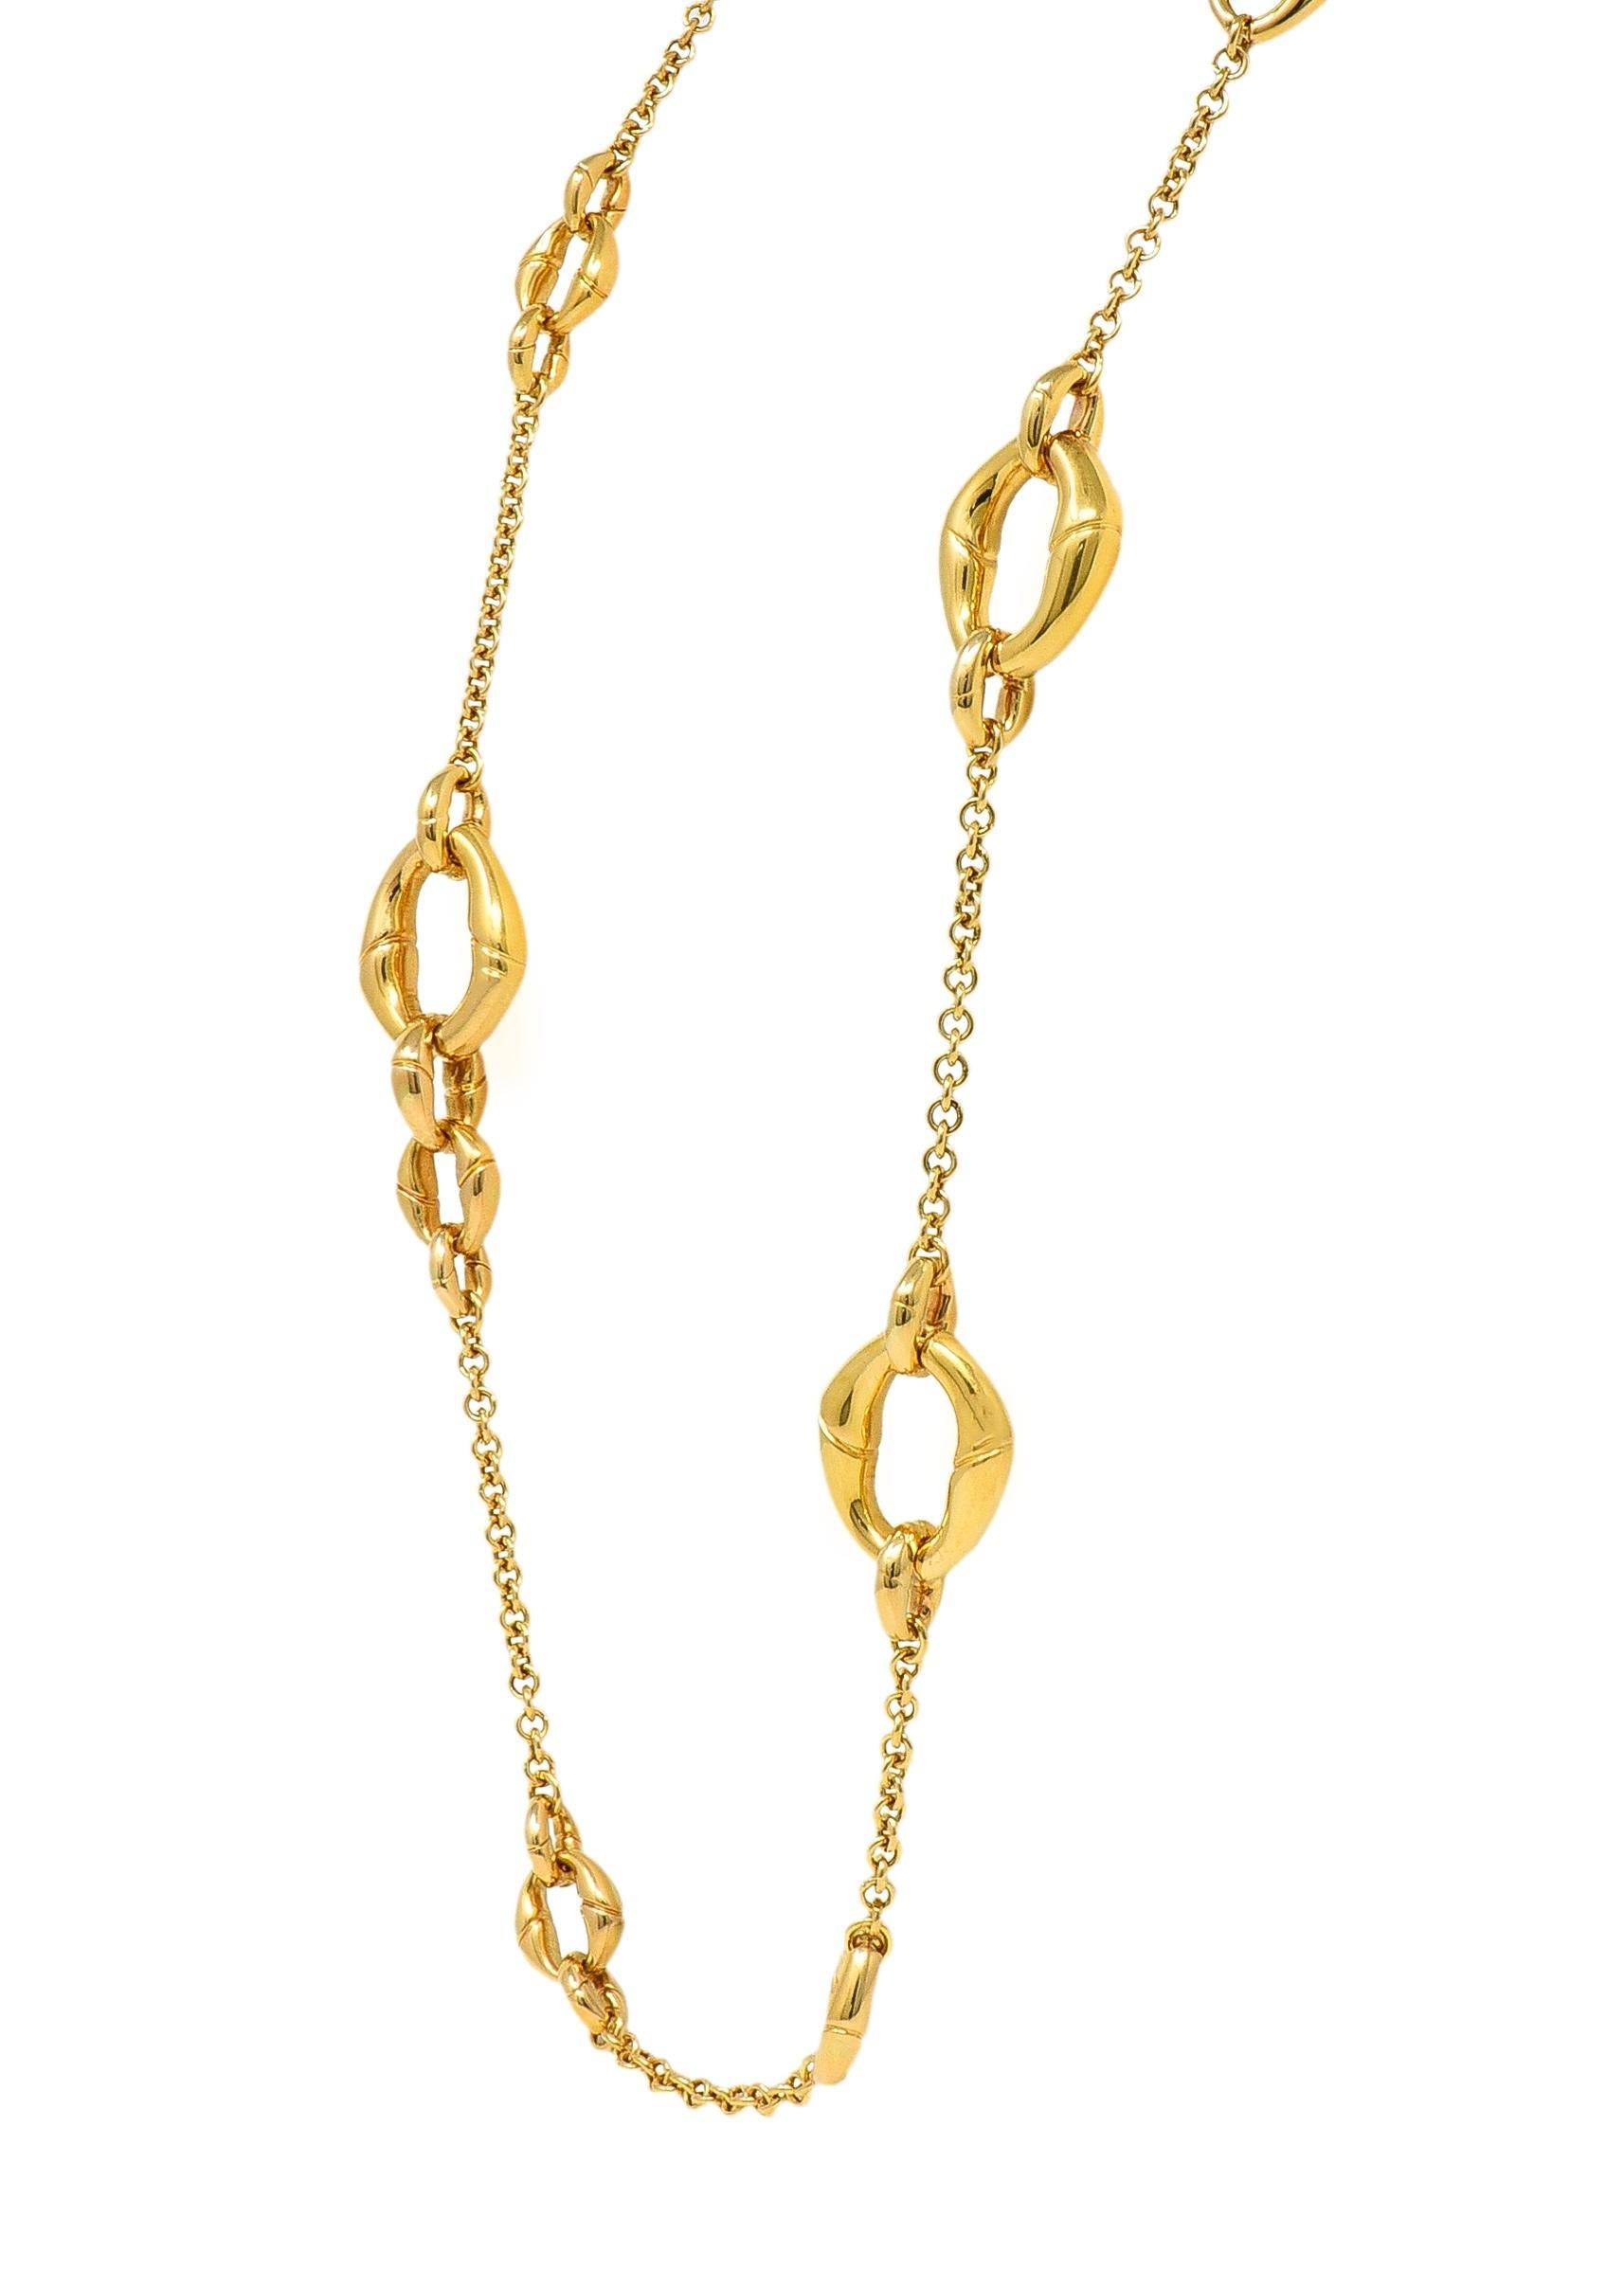 Women's or Men's Gucci Contemporary 18 Karat Yellow Gold Bamboo Link Station Necklace For Sale